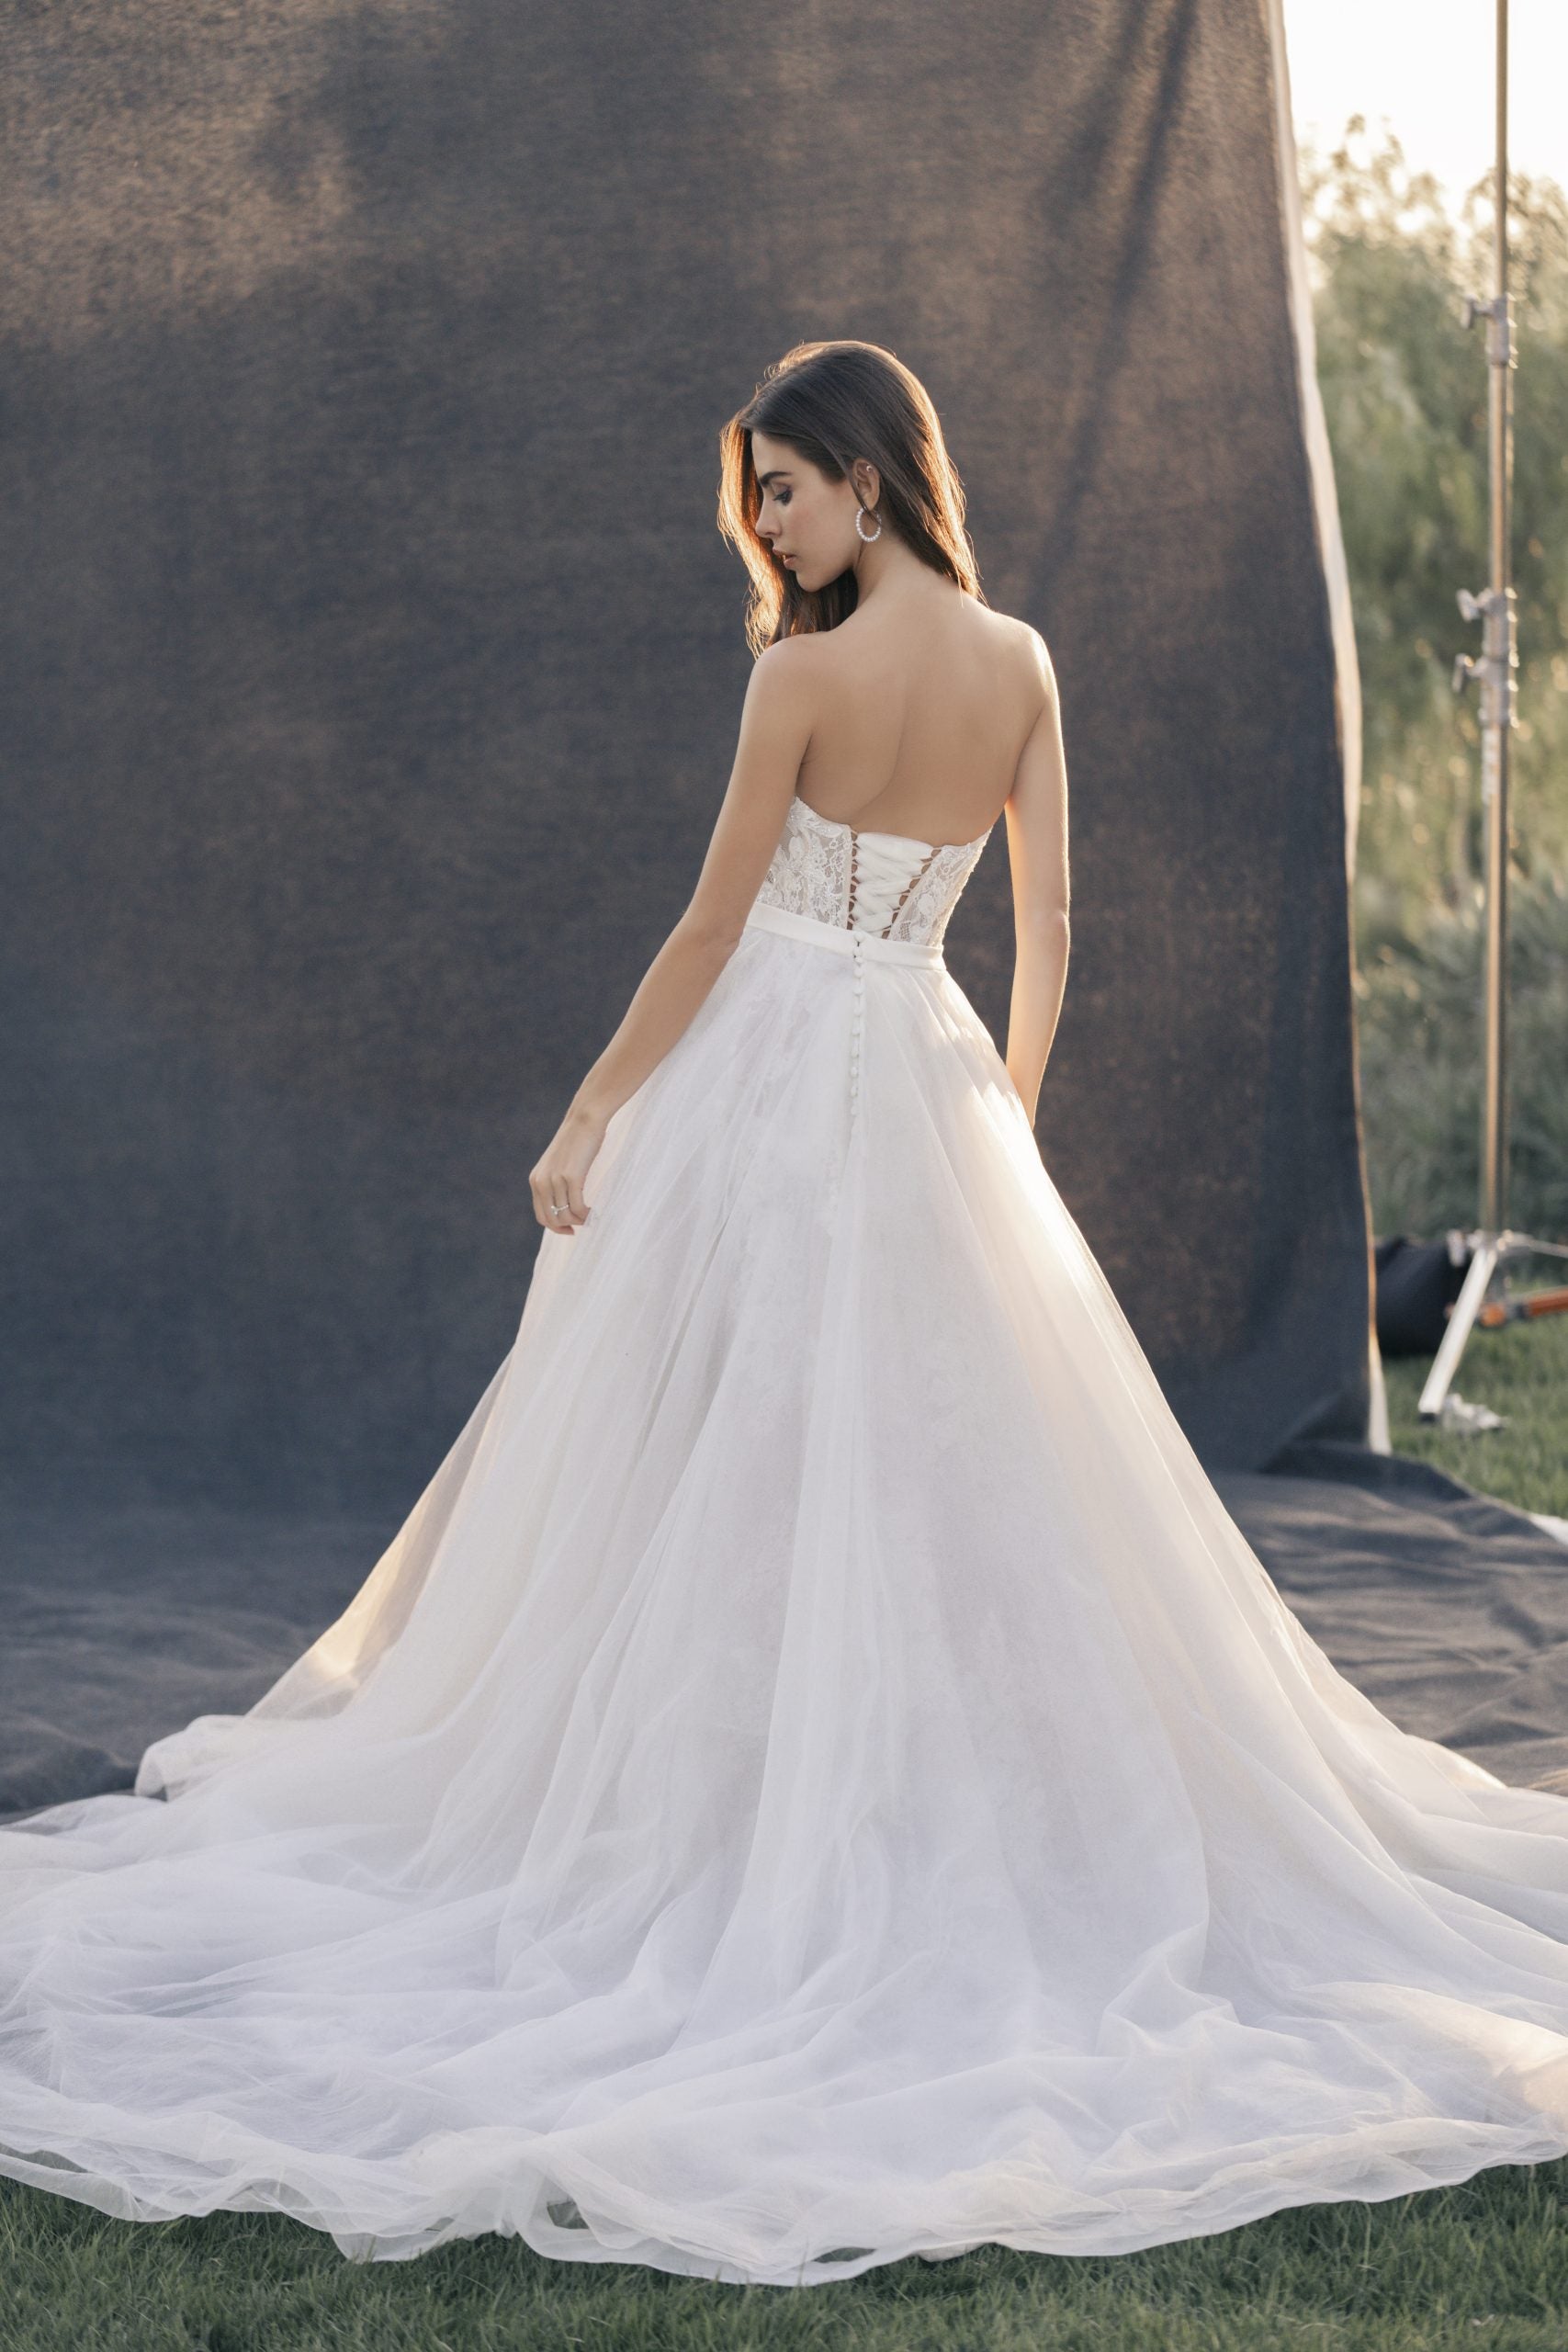 Romantic And Ethereal Tulle A-Line Gown by Allure Bridals - Image 2